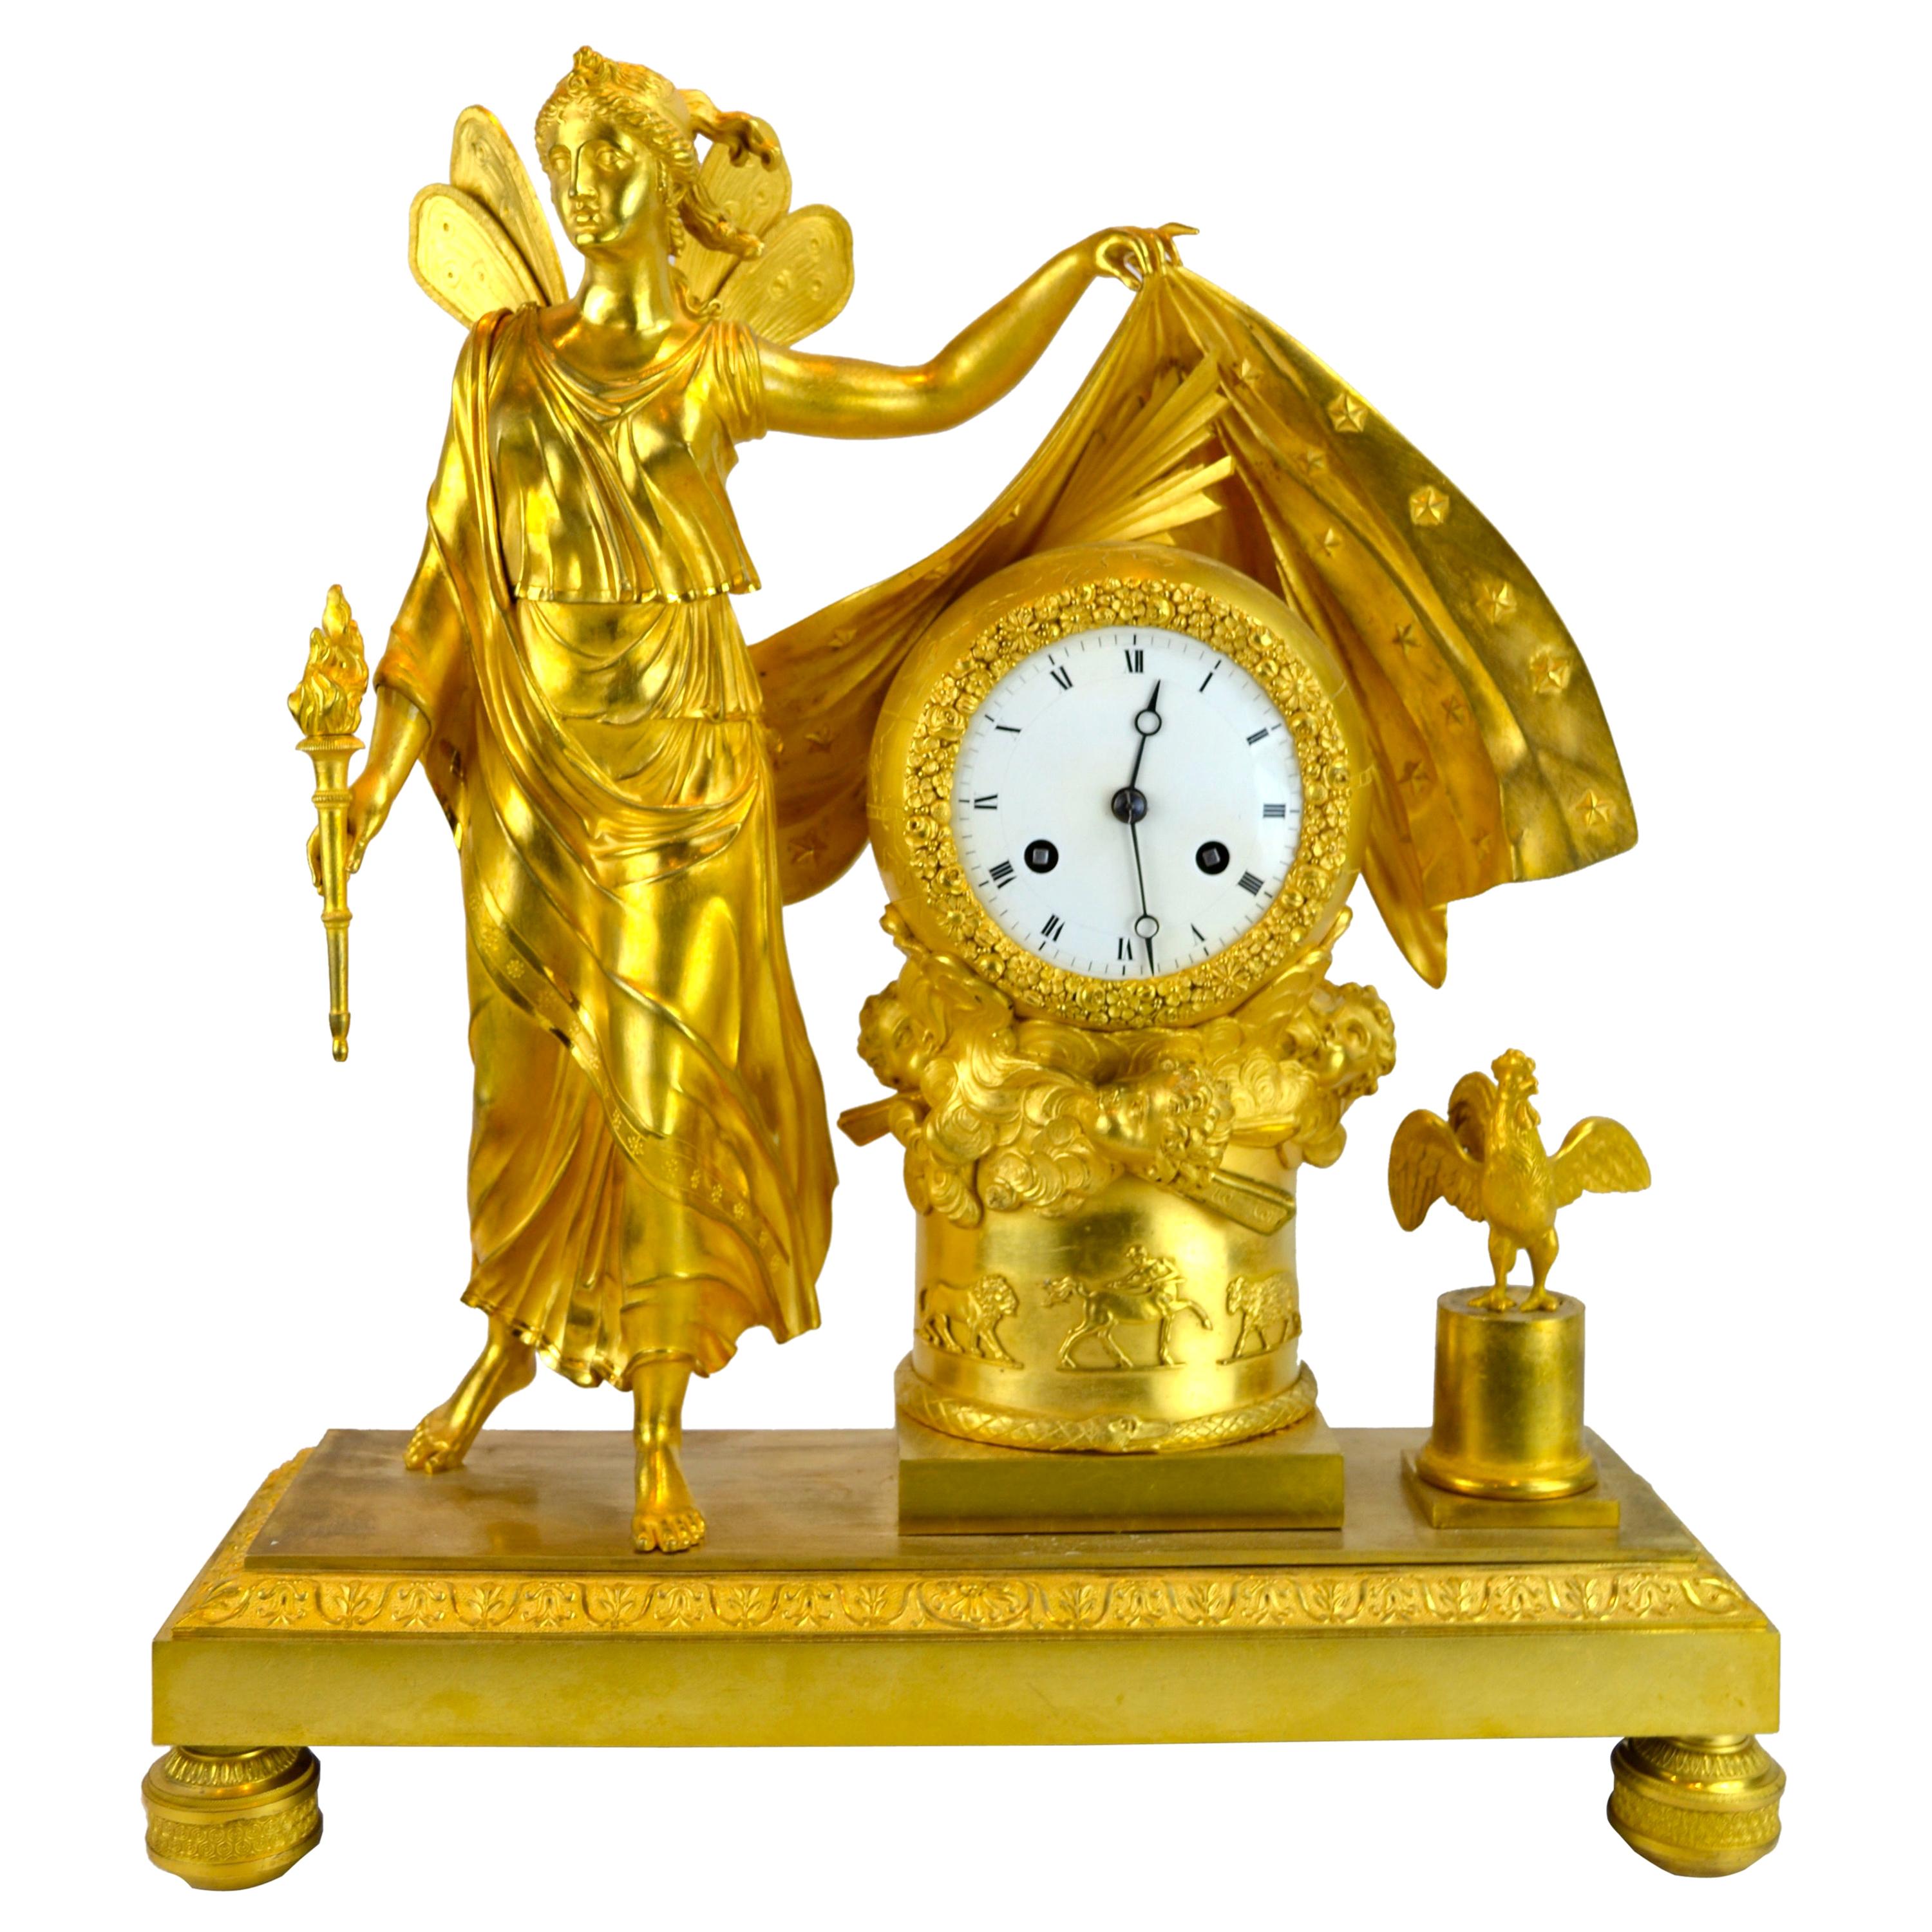   A French Empire Clock of the Roman Goddess Aurora Announcing a New Day